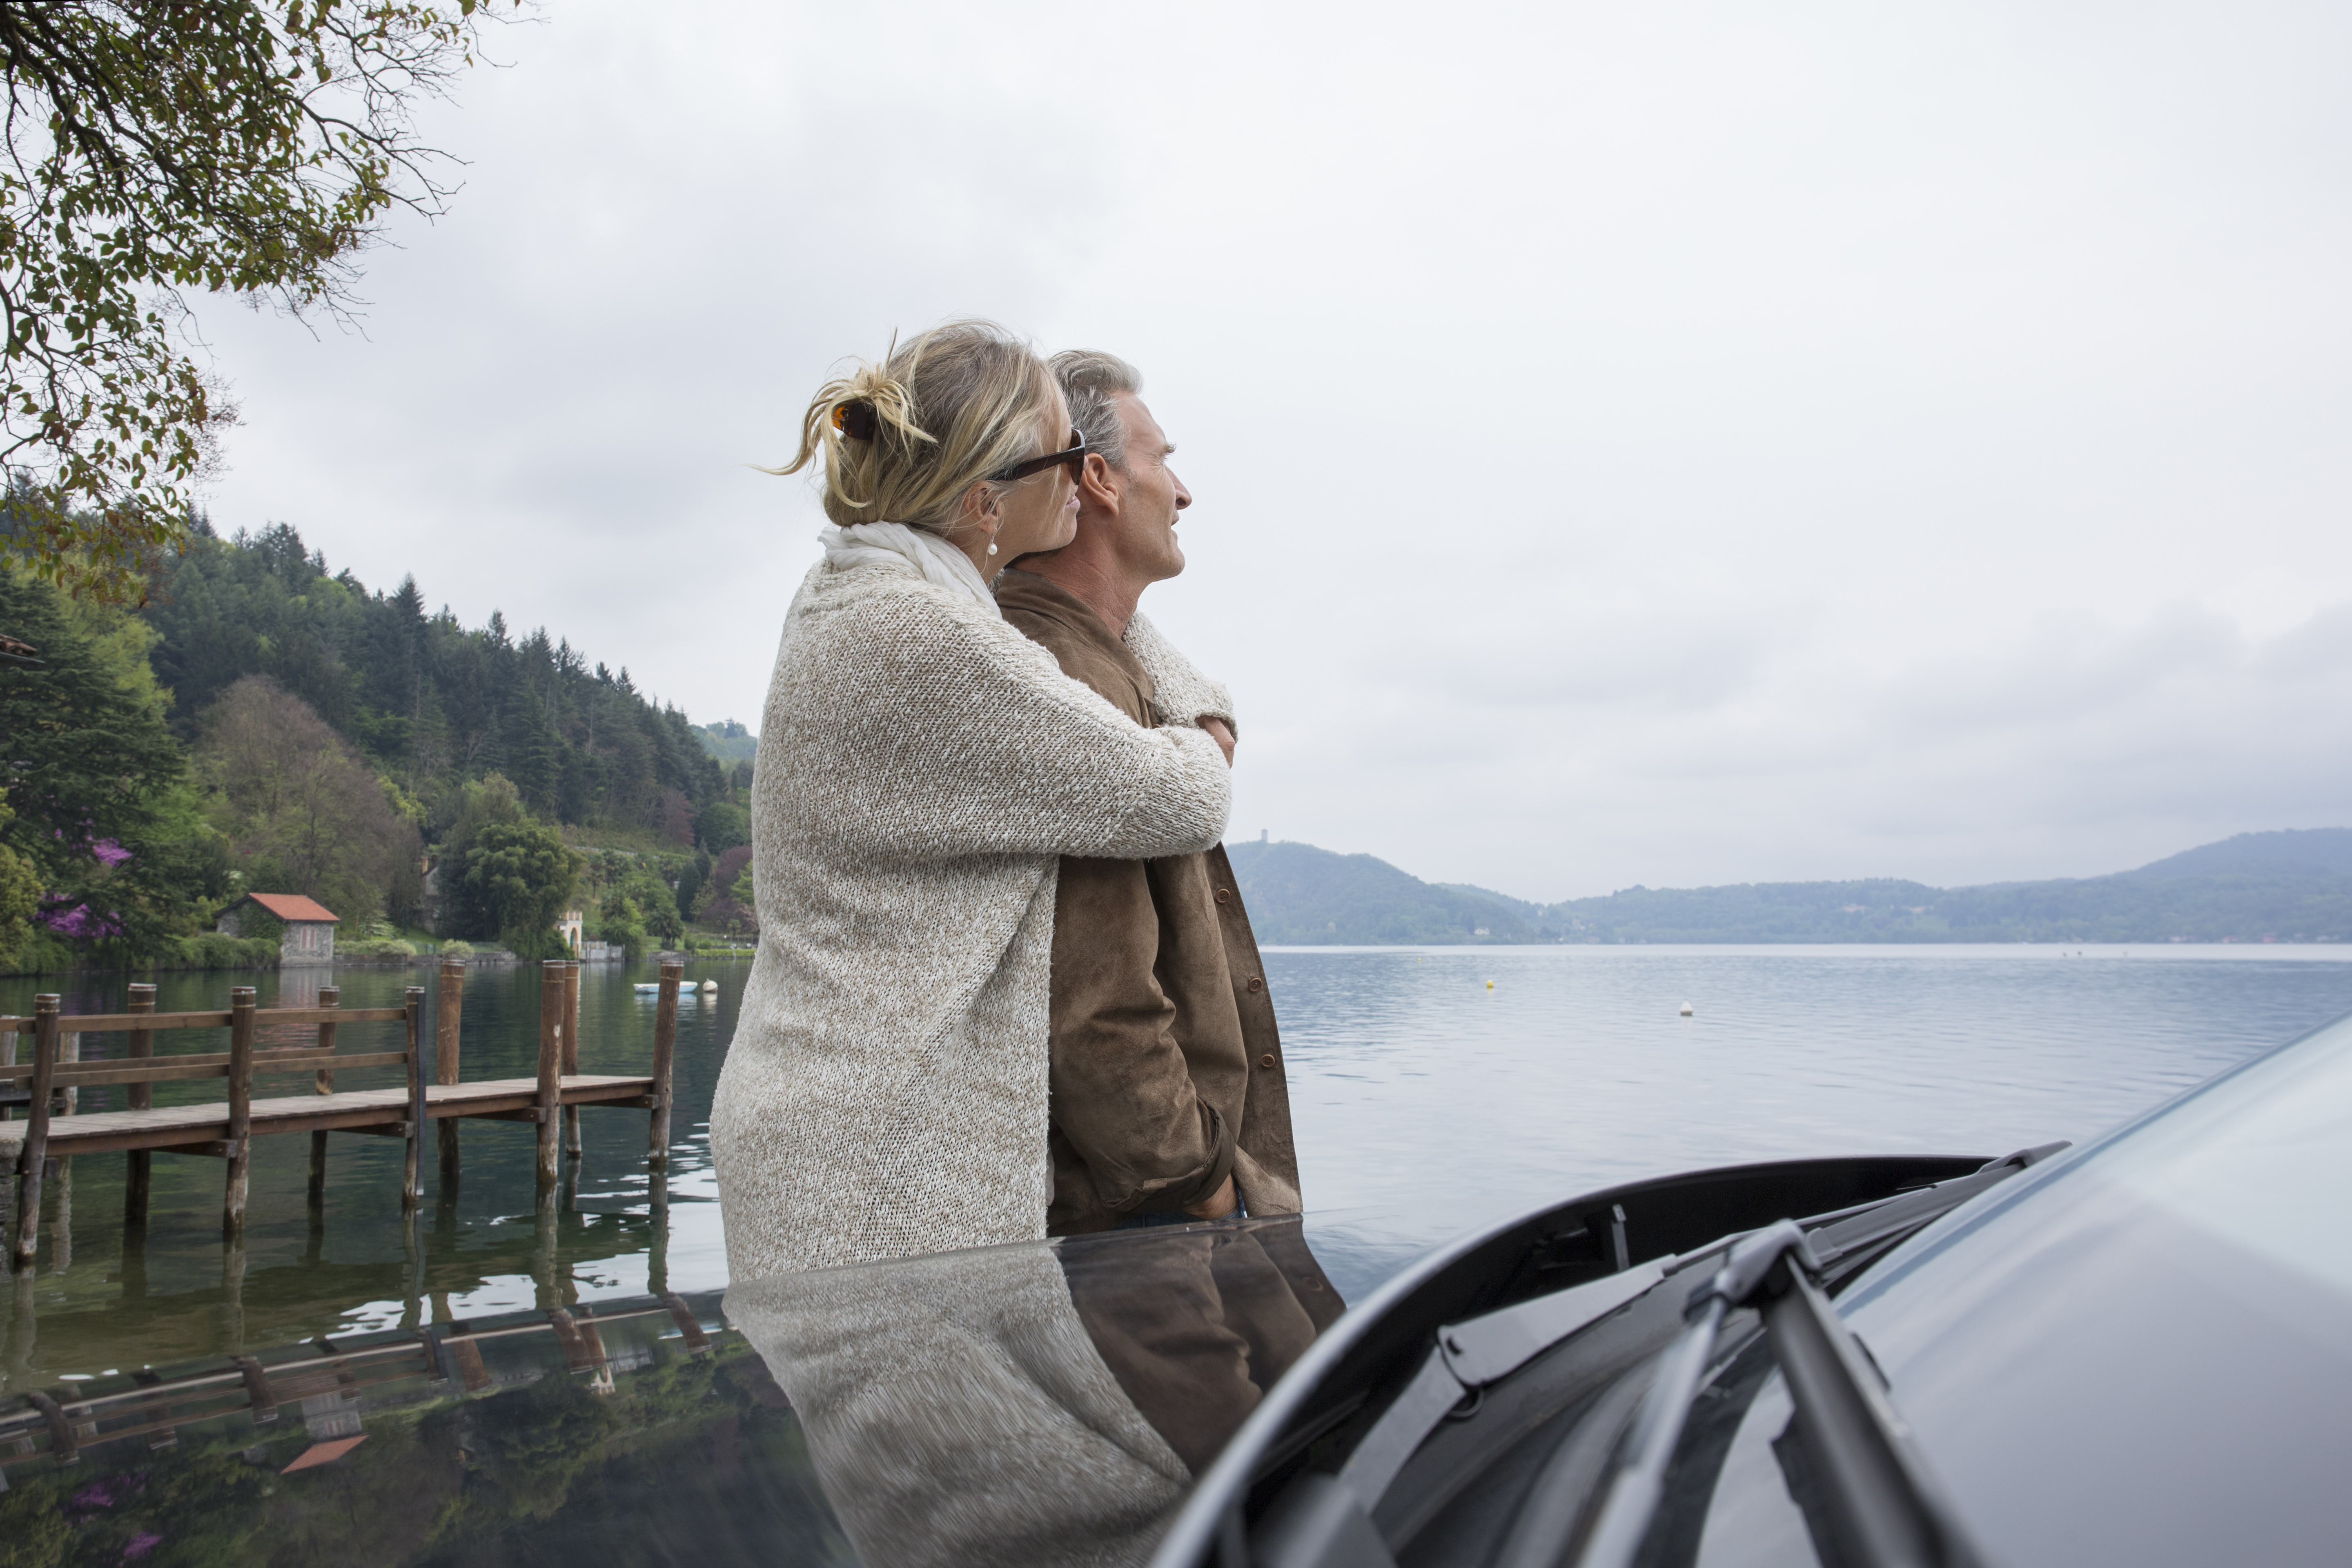 Couple embracing standing beside their car near a lake | Source: Getty Images